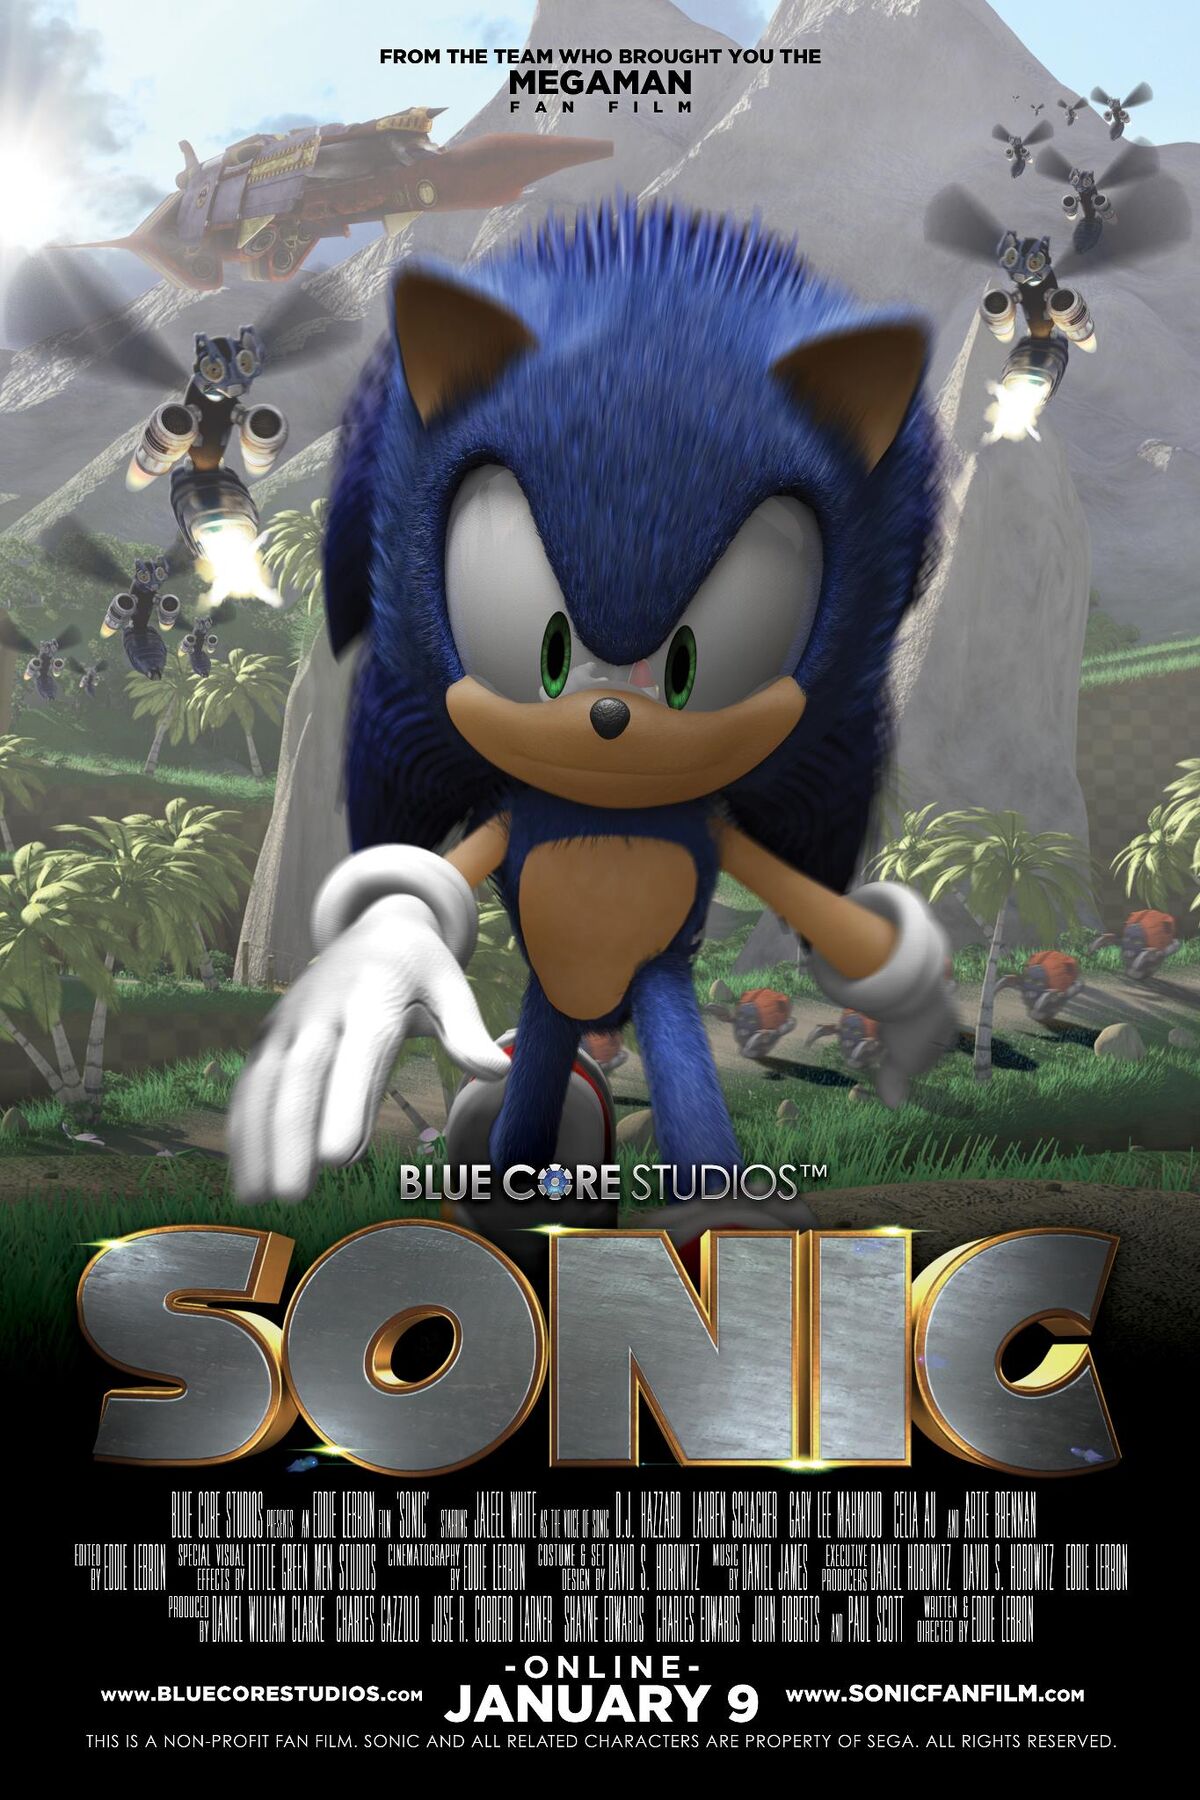 Sonic movie 3 fanmade japan poster and final V4 Sonic movie 3 US